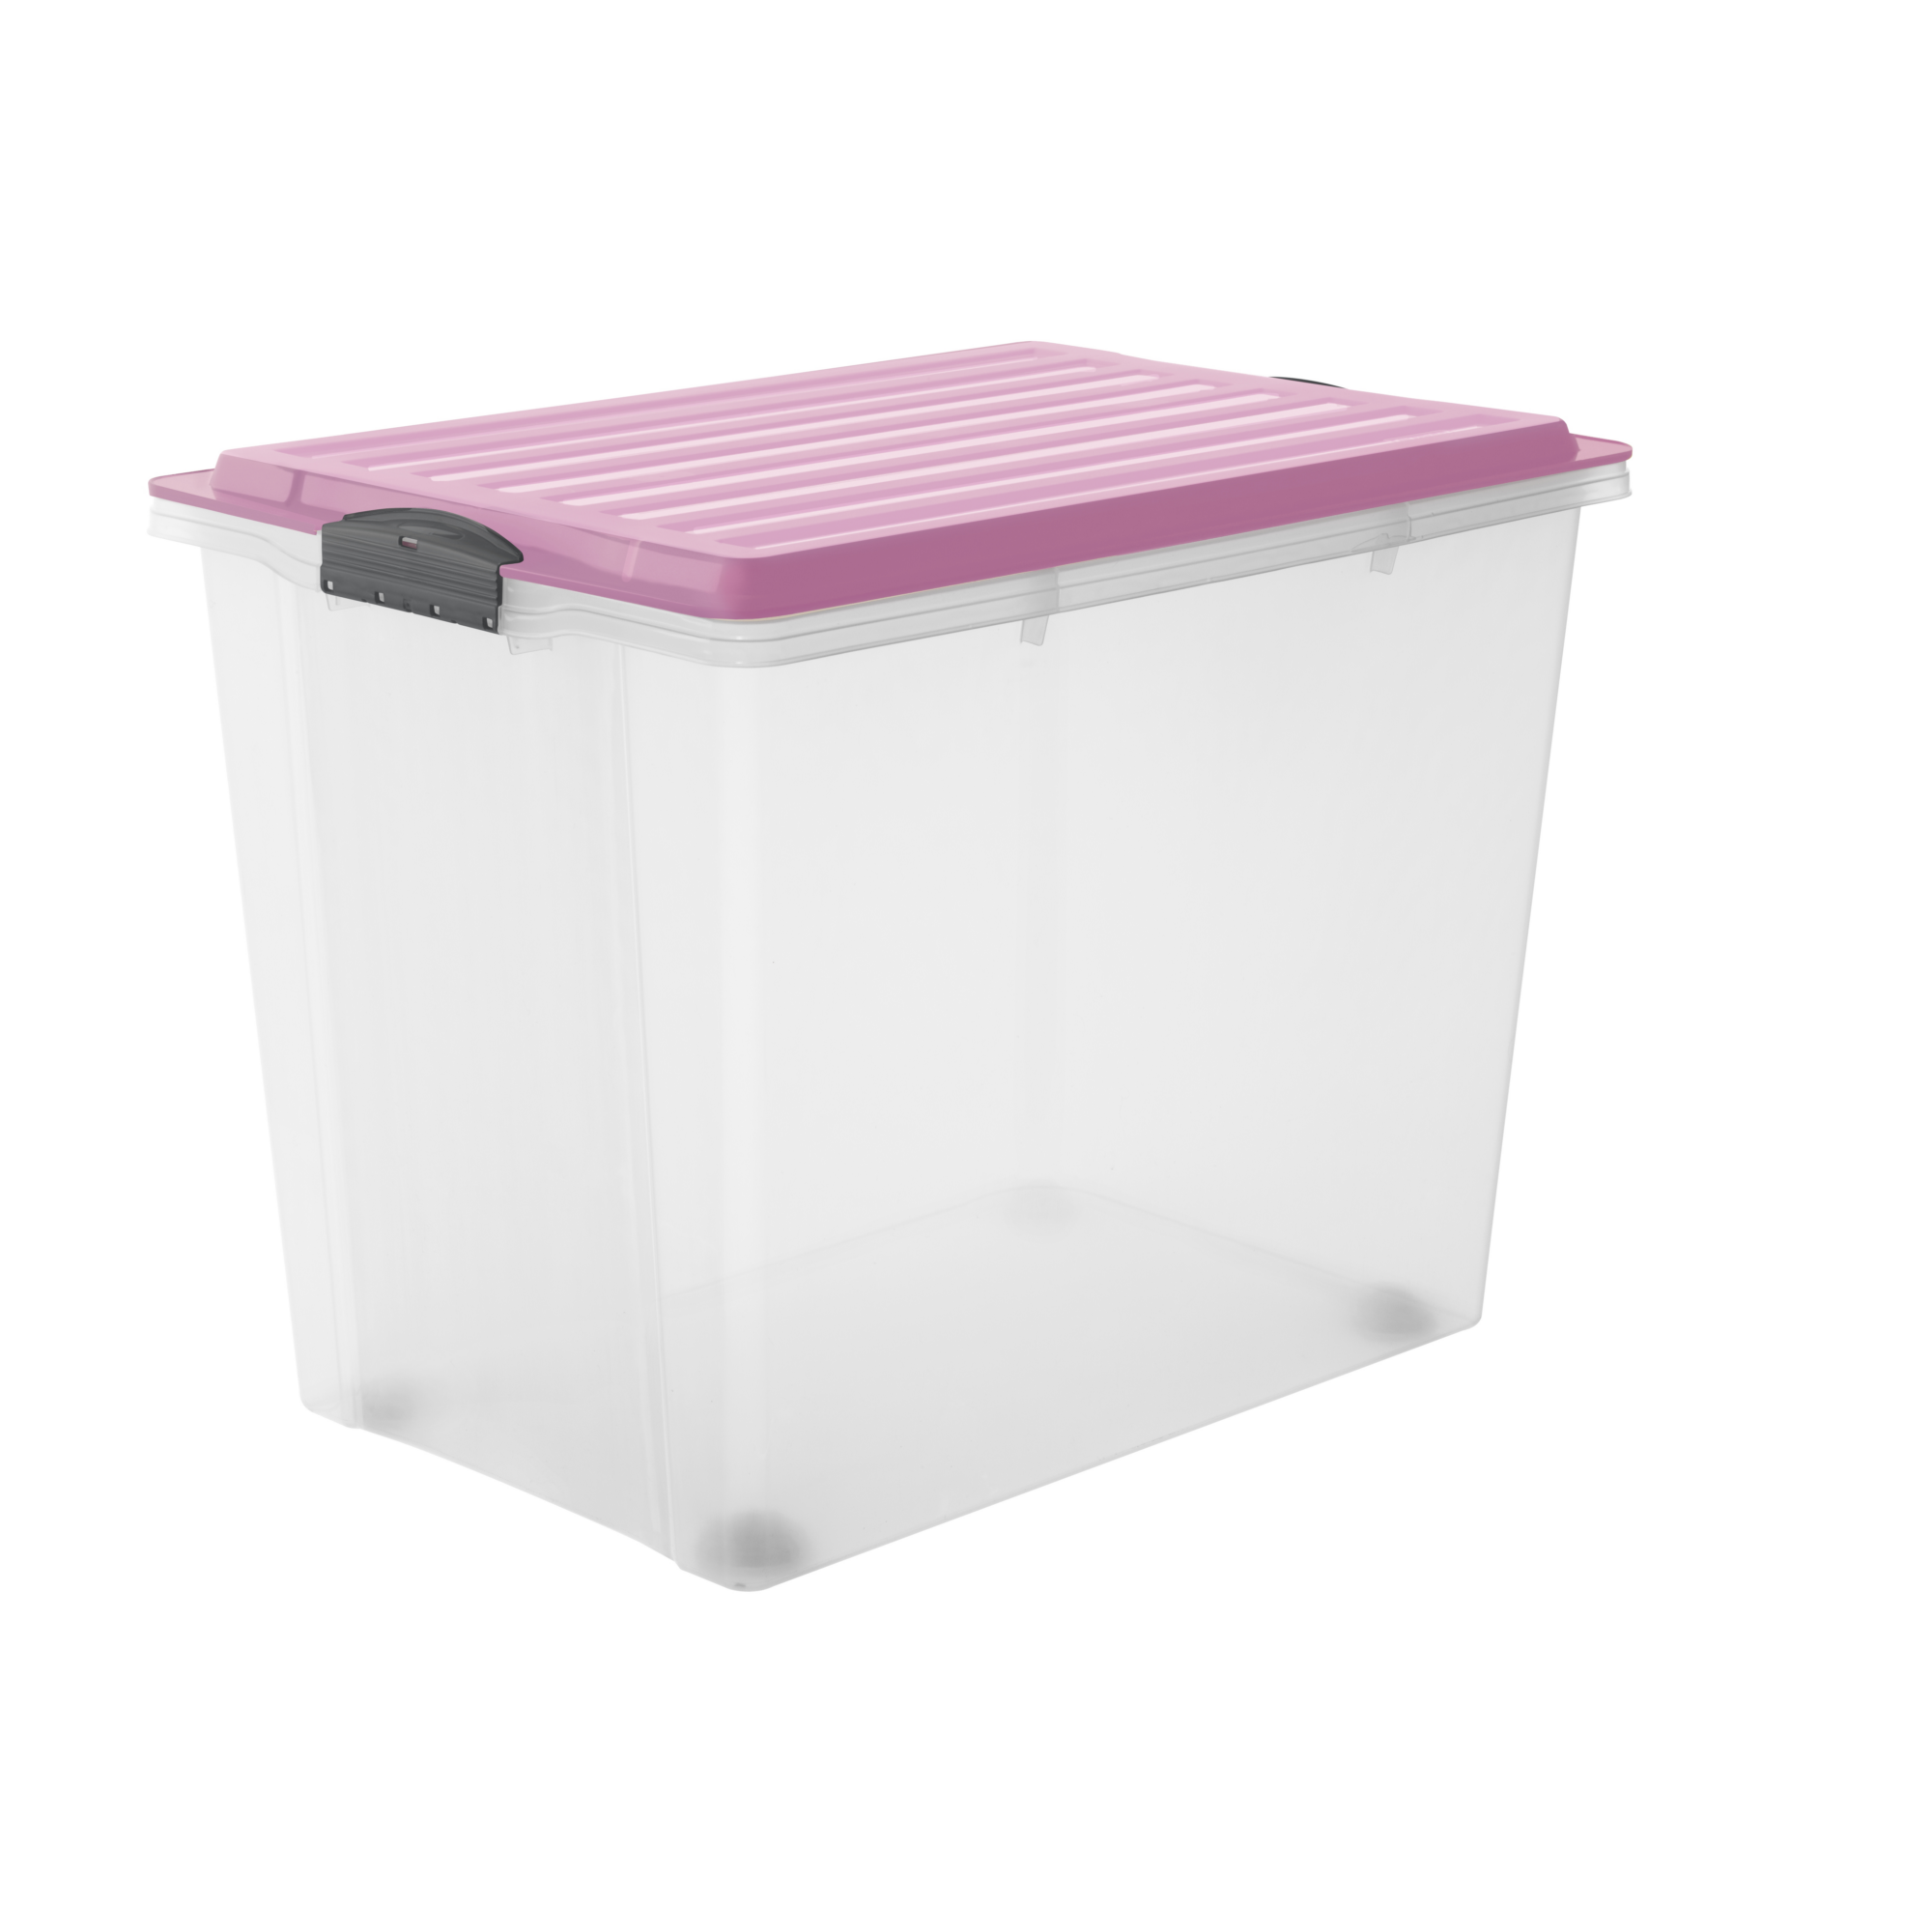 Stapelbox rosa 70l + product picture